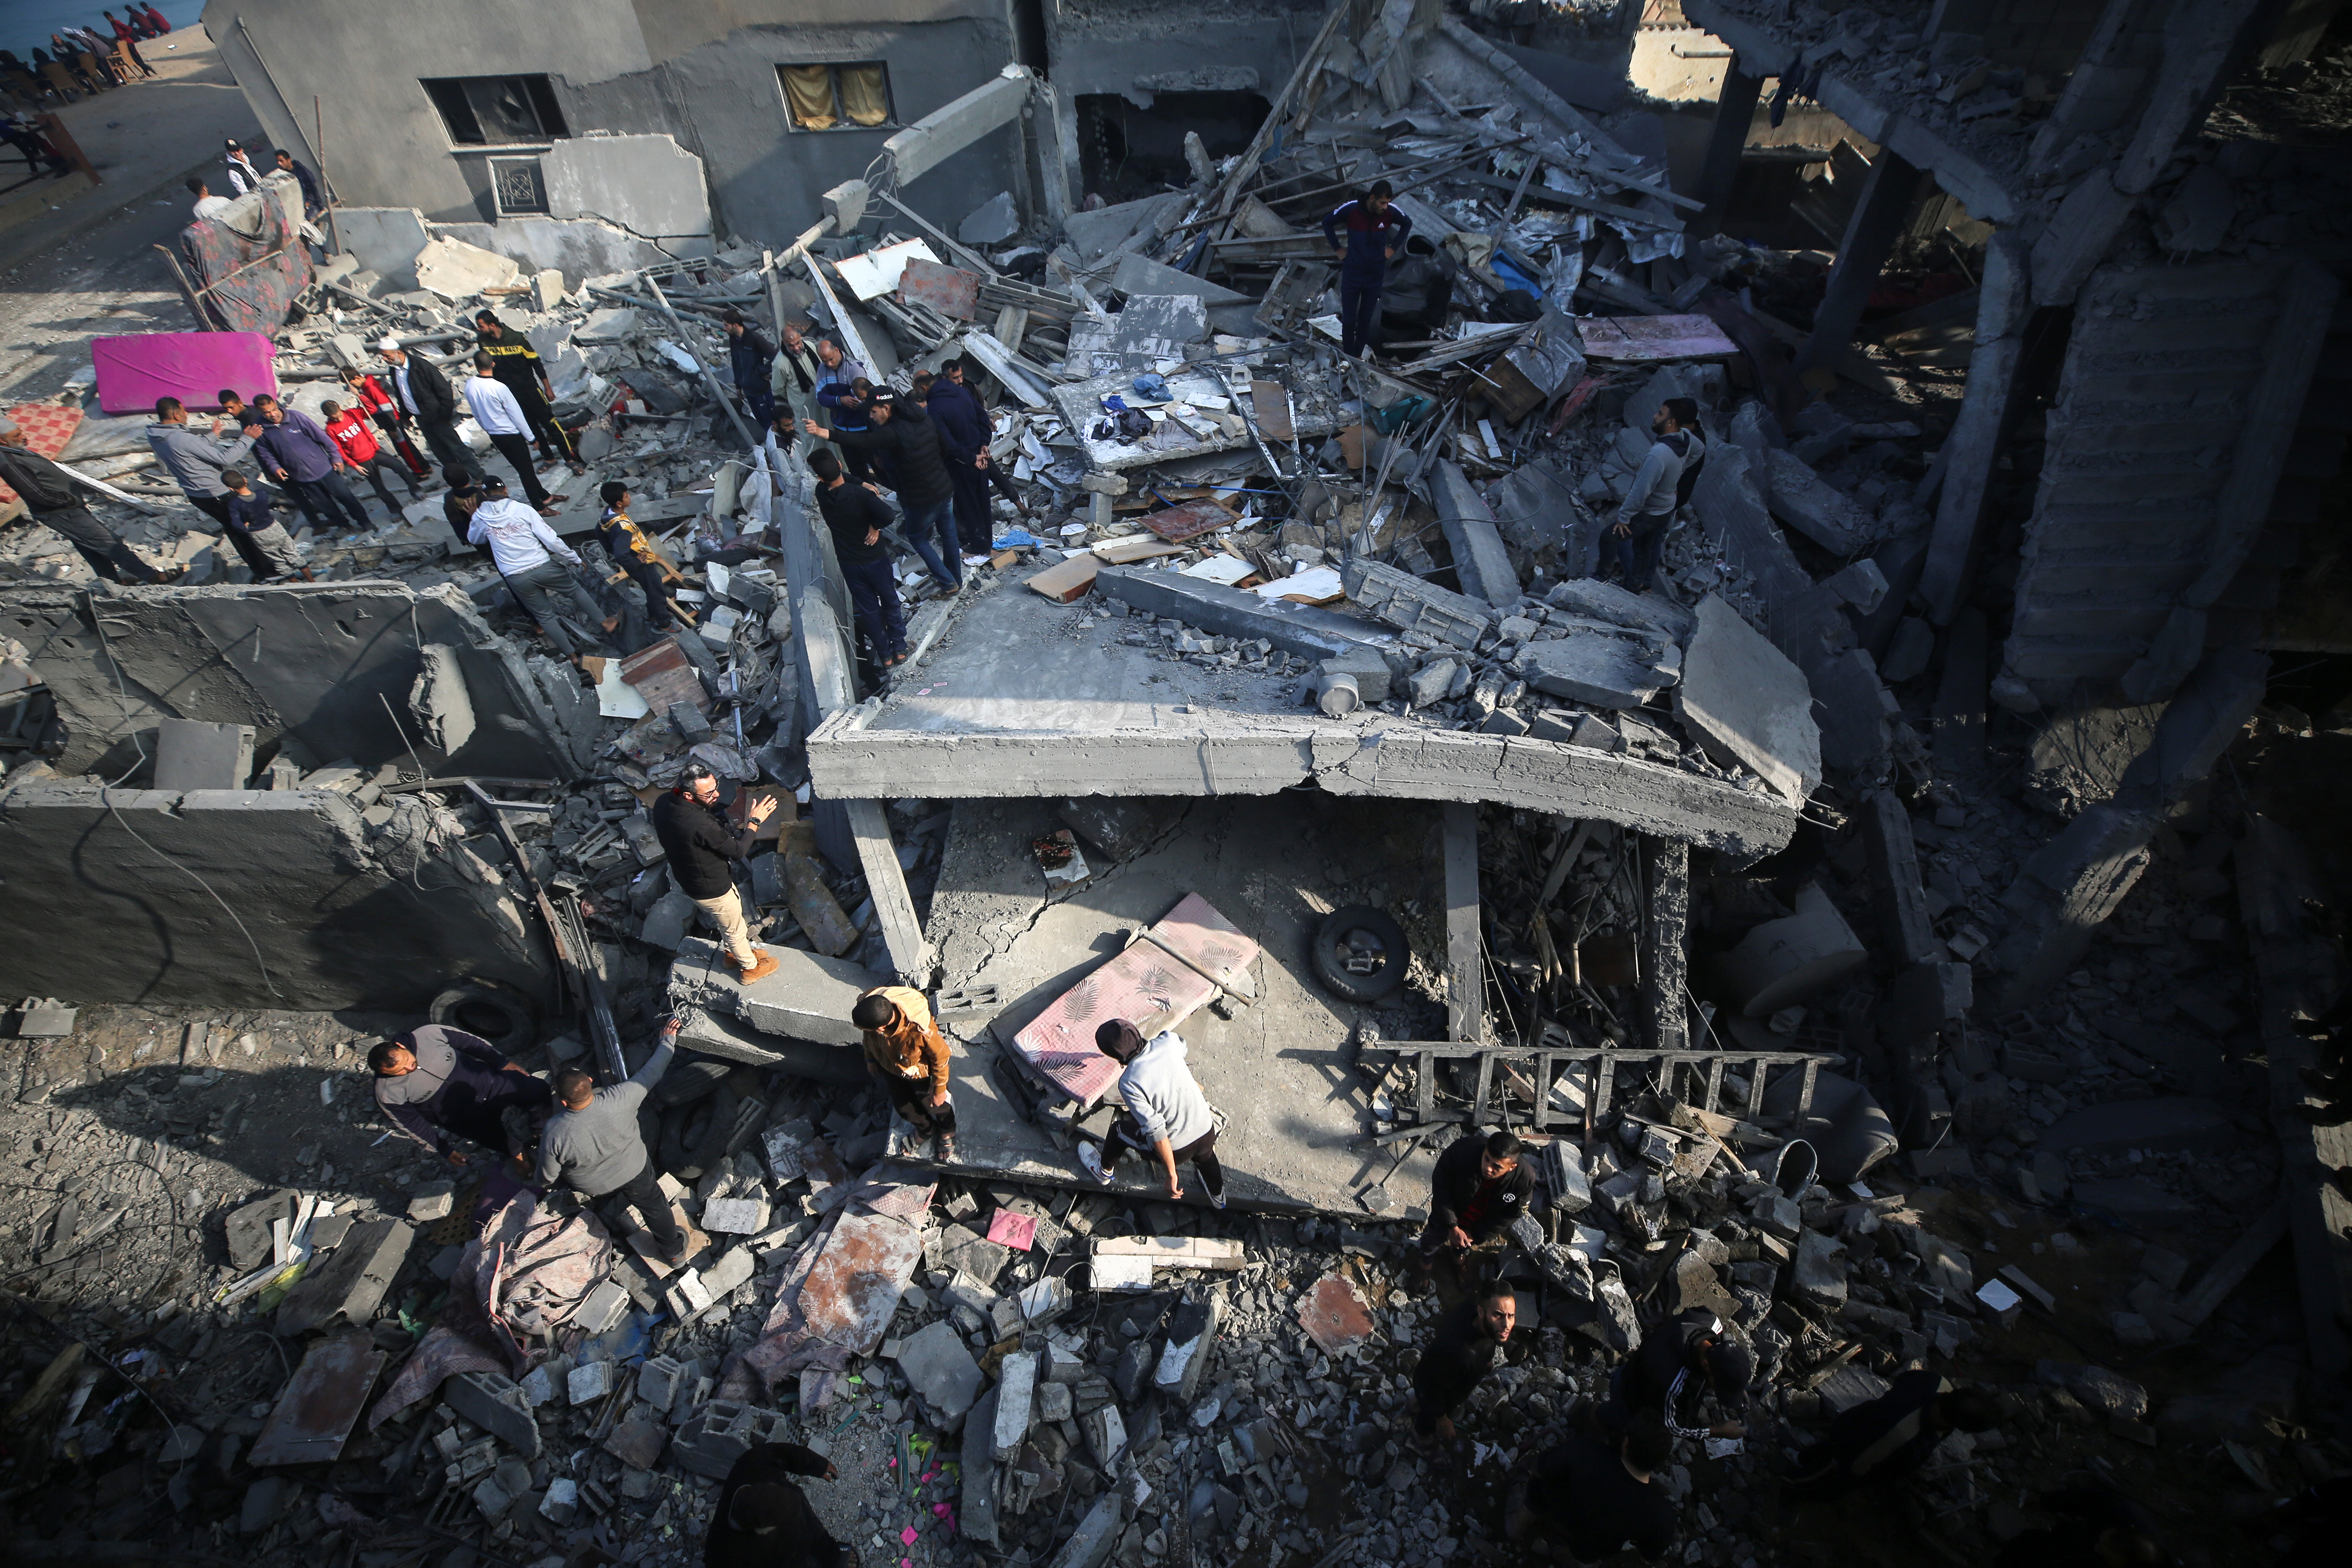 Aerial view of people amidst the rubble of a collapsed building, indicating a disaster site